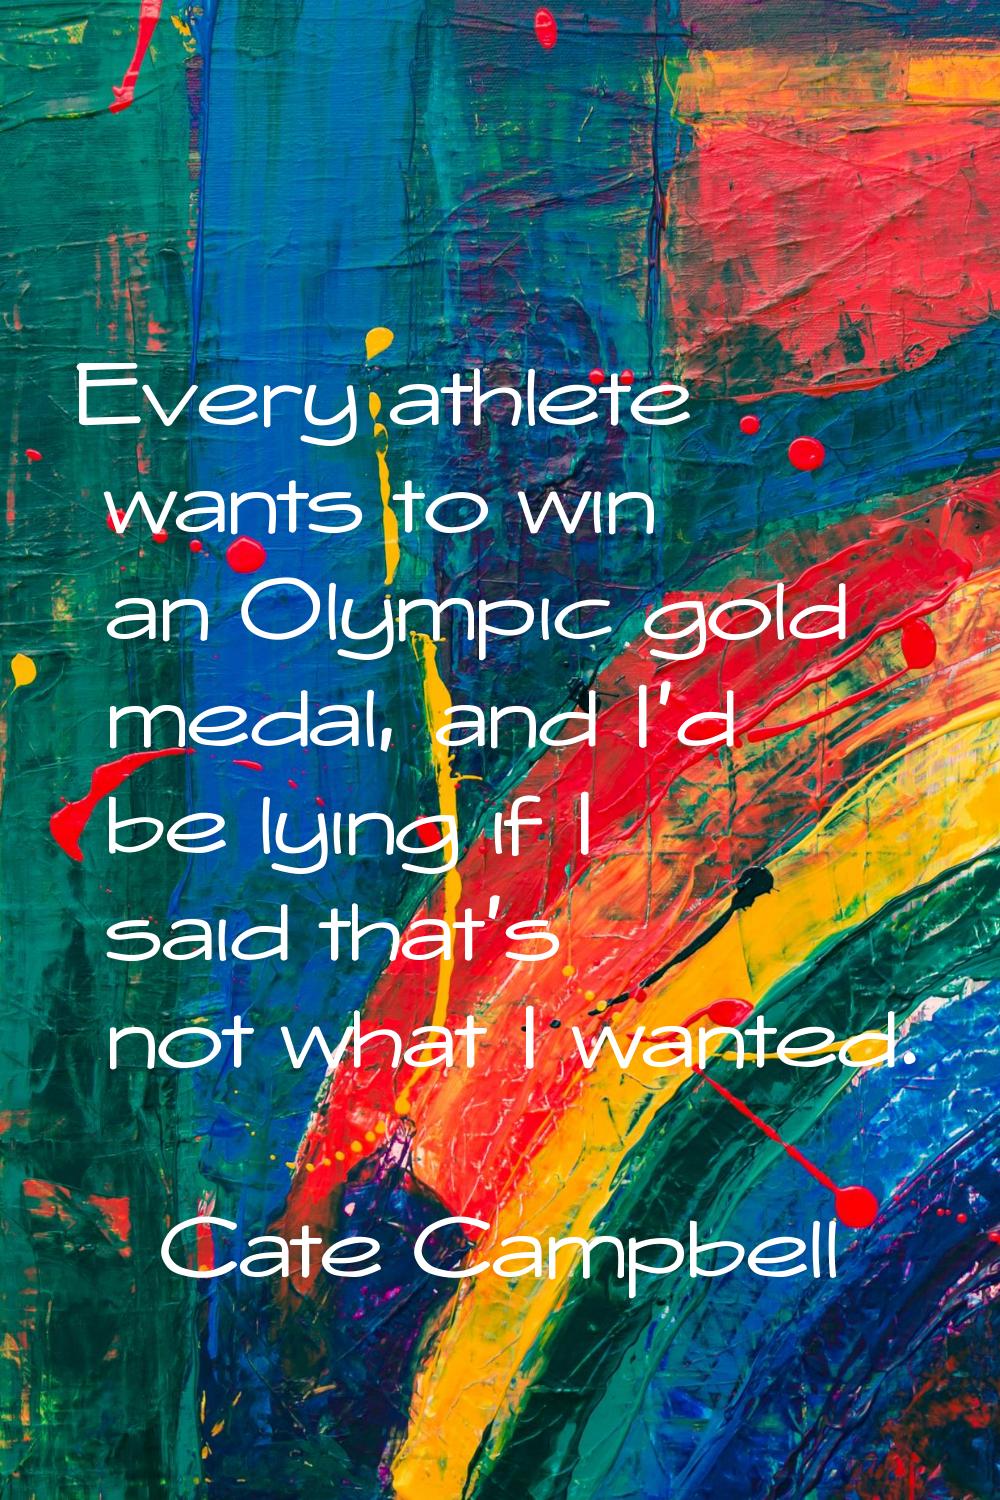 Every athlete wants to win an Olympic gold medal, and I'd be lying if I said that's not what I want